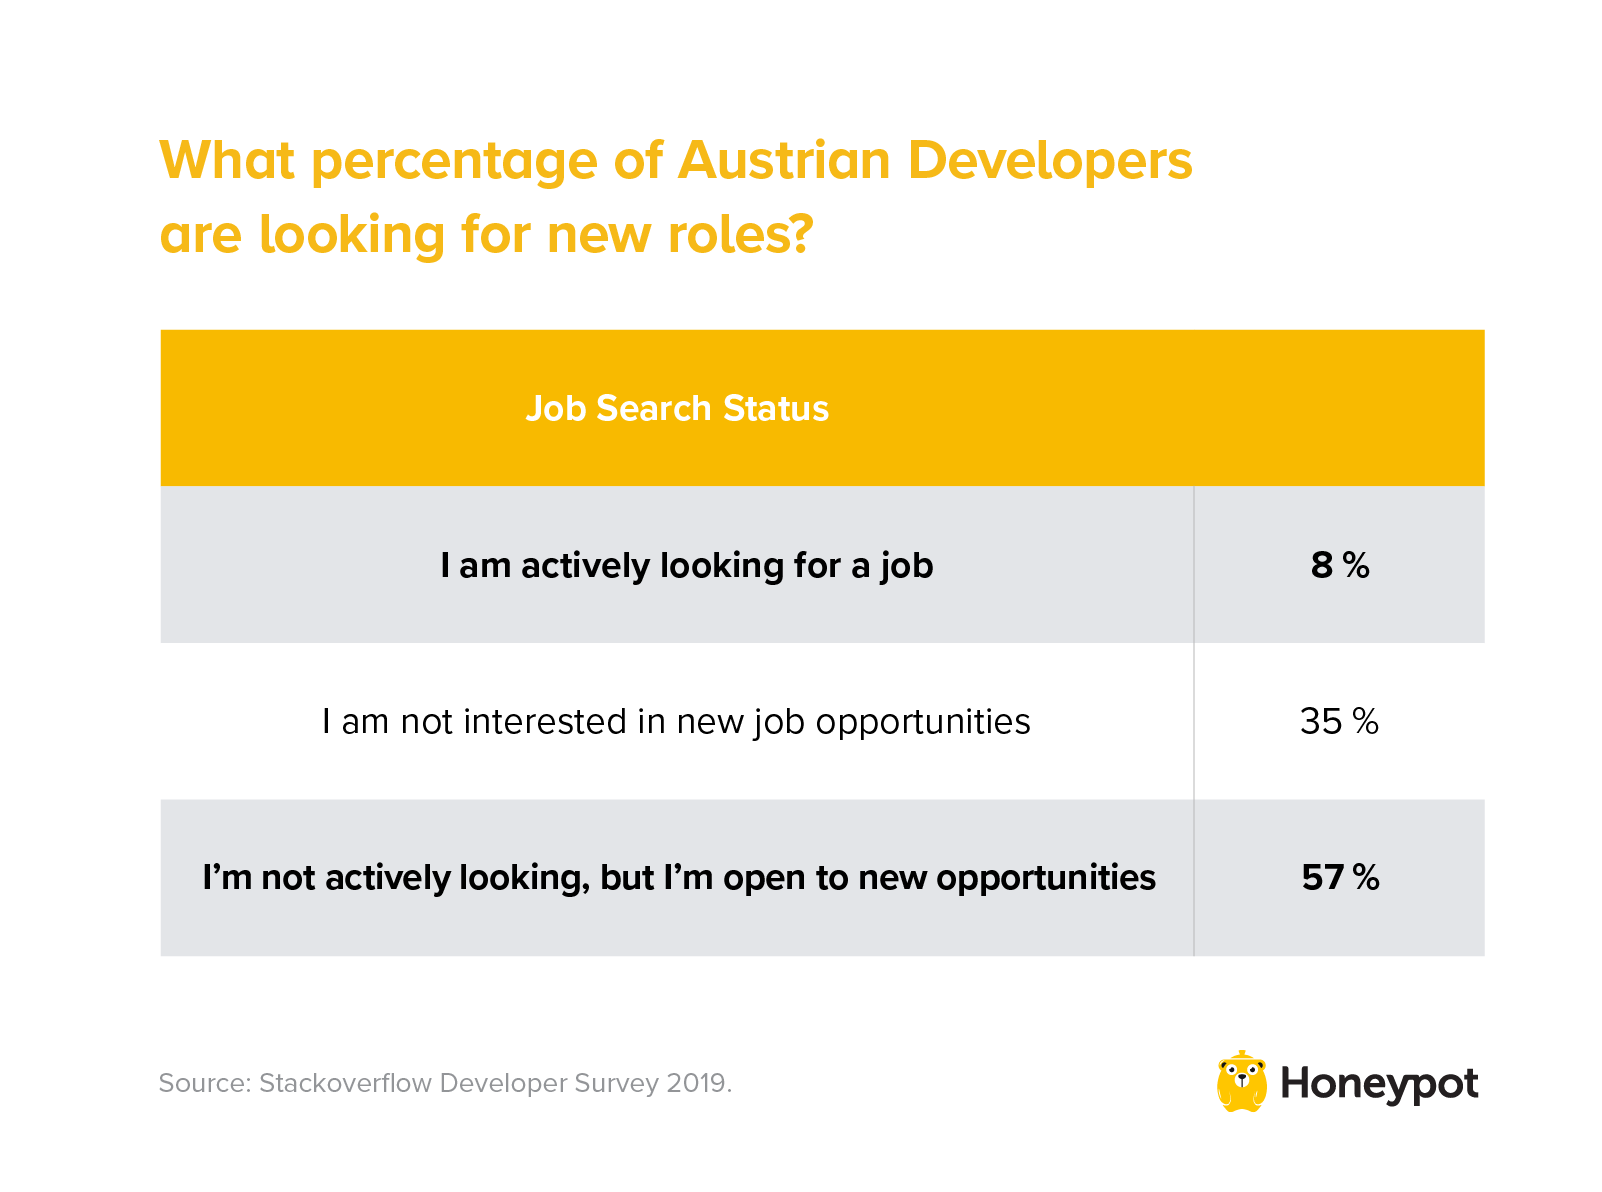 What percentage of Austrian developers are looking for new roles?